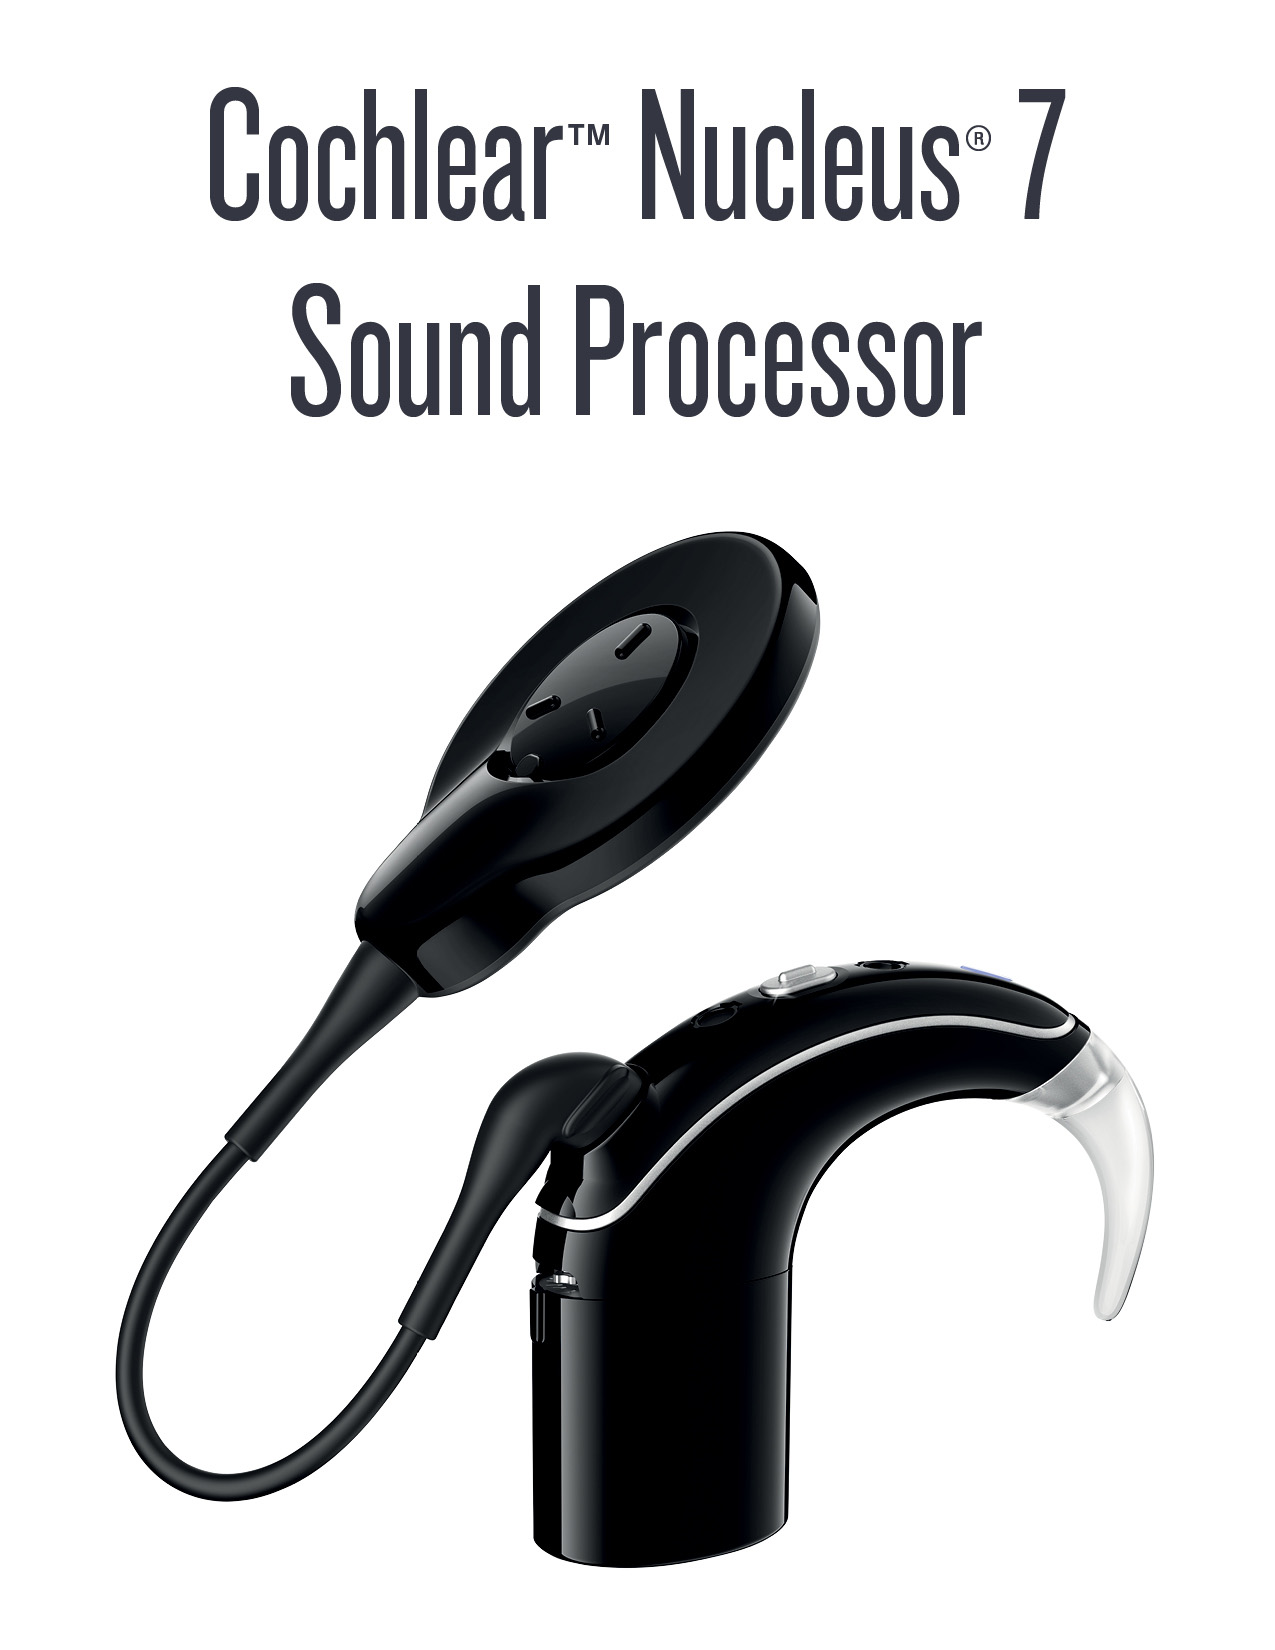 Cochlear introduces the world’s first and only Made for iPhone cochlear implant sound processor, the Nucleus 7 Sound Processor.